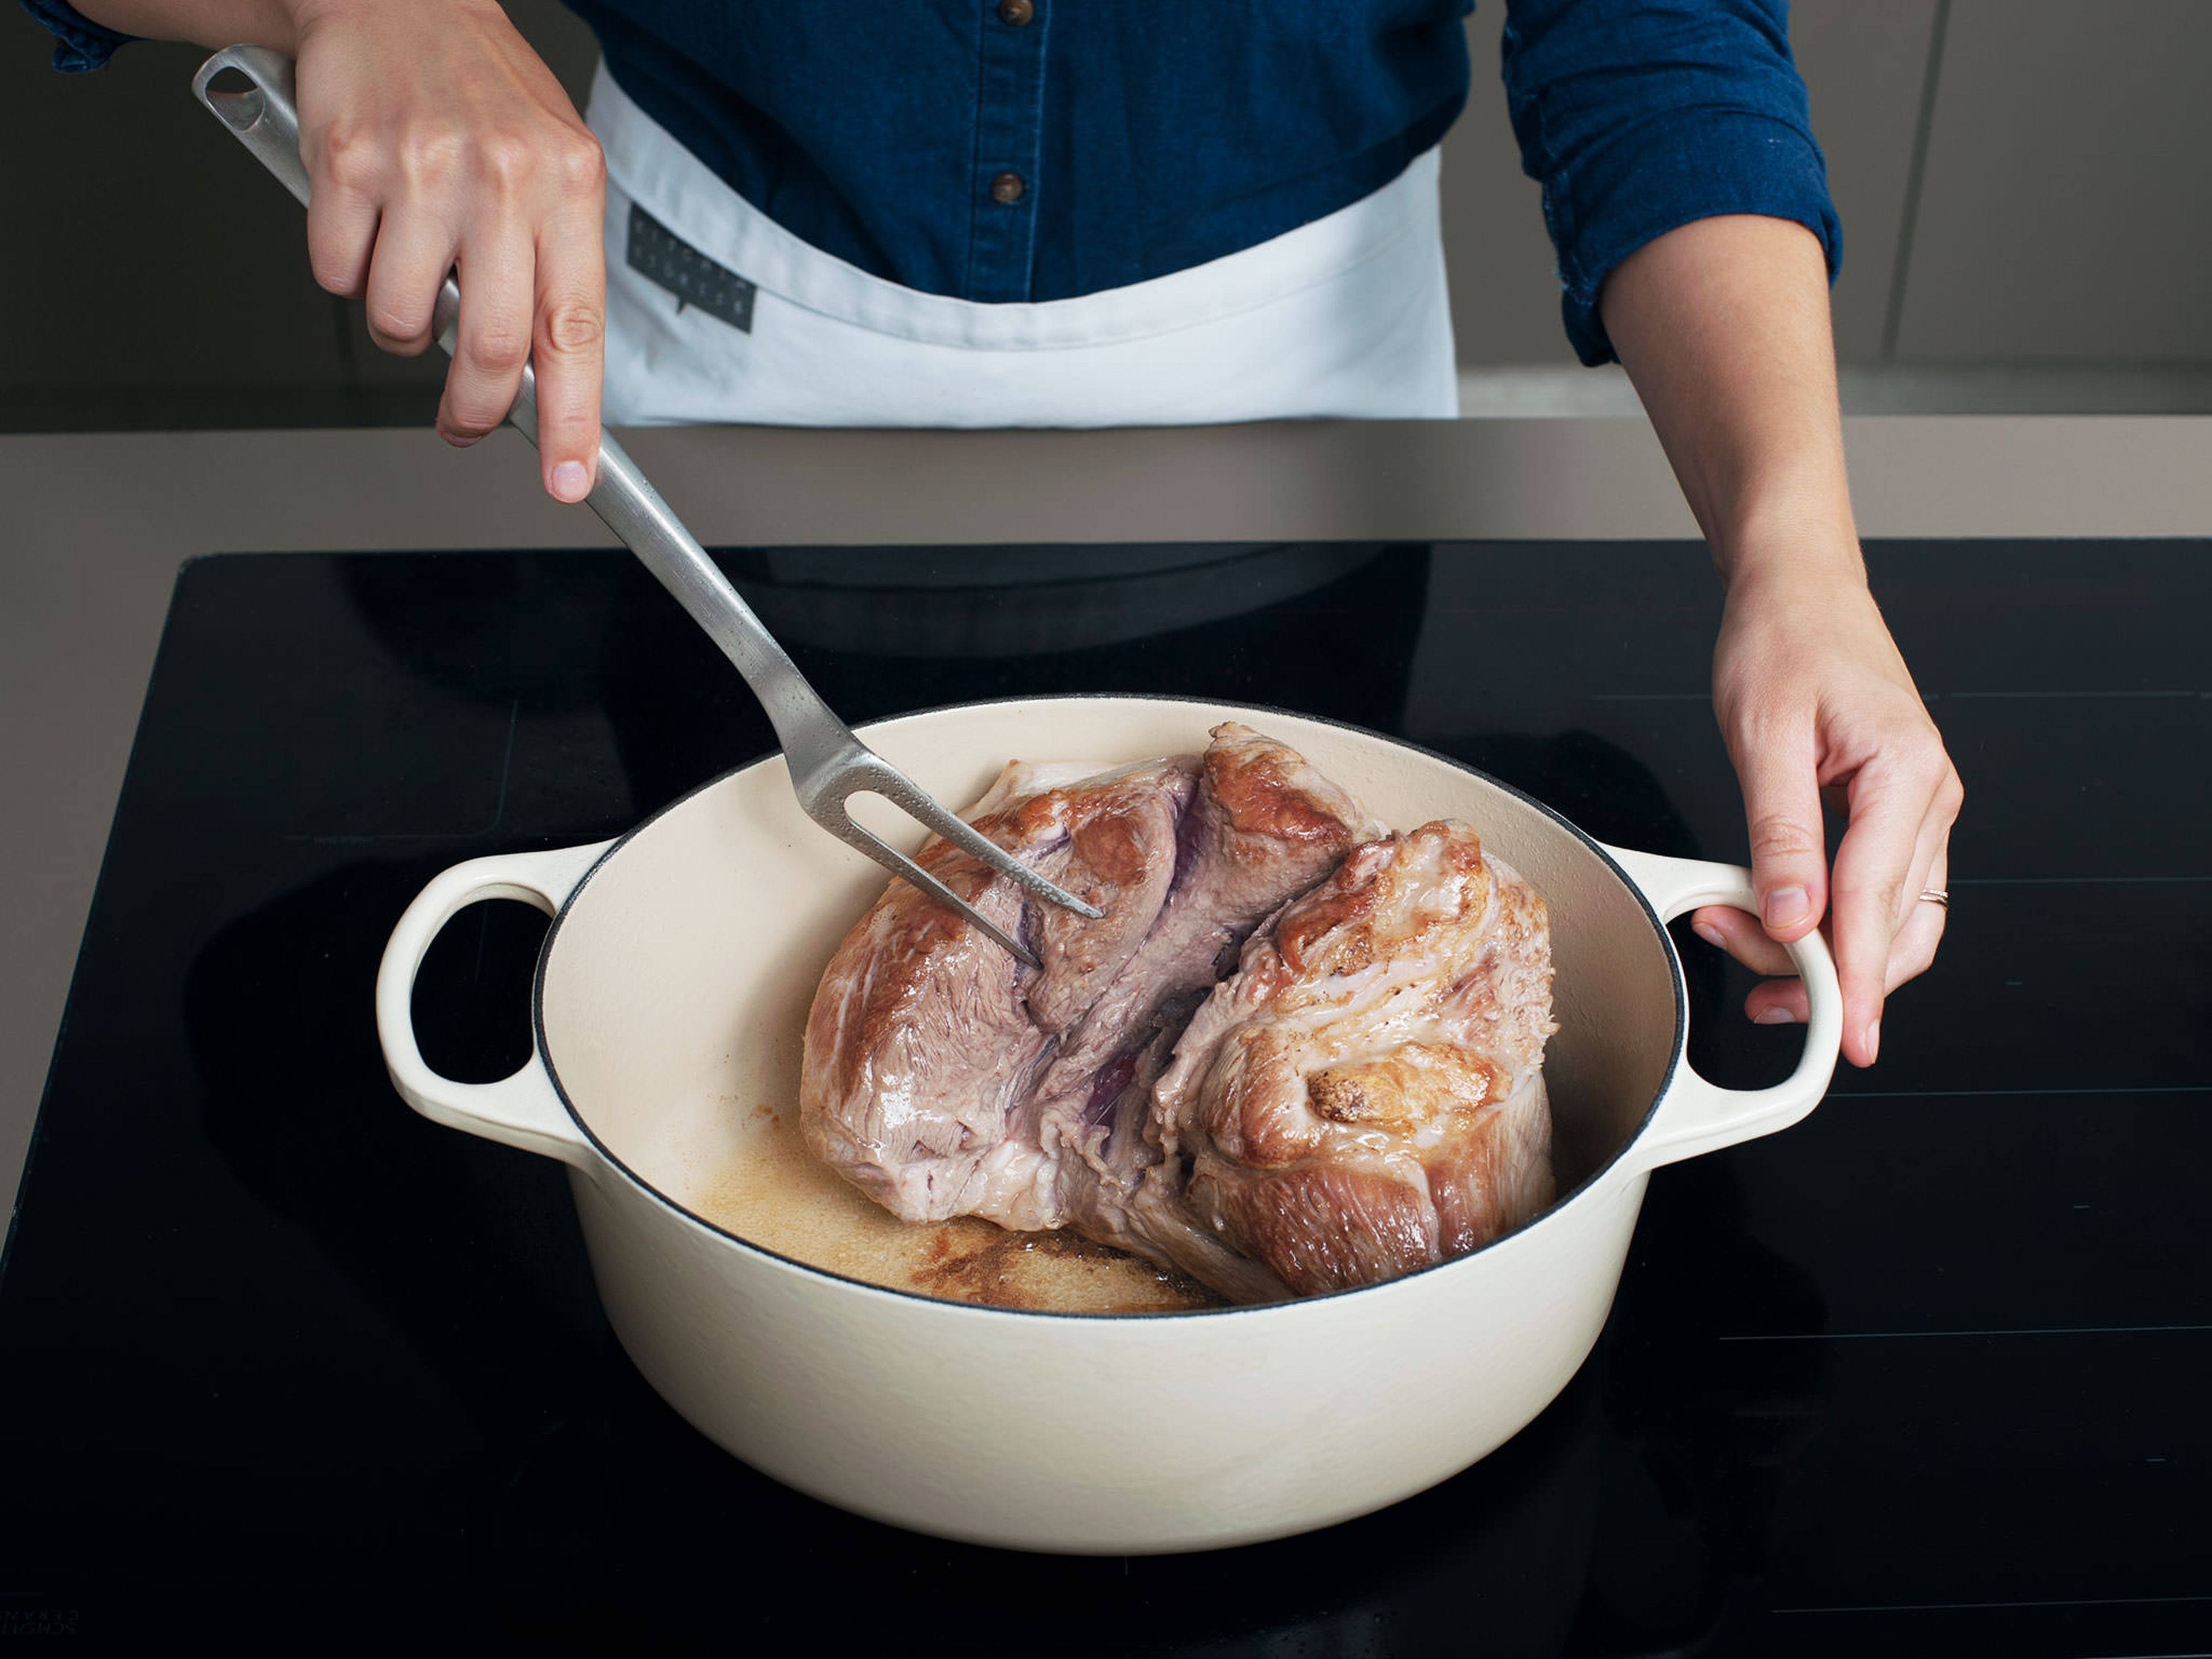 Trim excess fat from pork shoulder, if desired. Season with salt and pepper. Heat a large, ovenproof pot over medium-high heat. Brown pork on all sides, then transfer to plate and set aside.